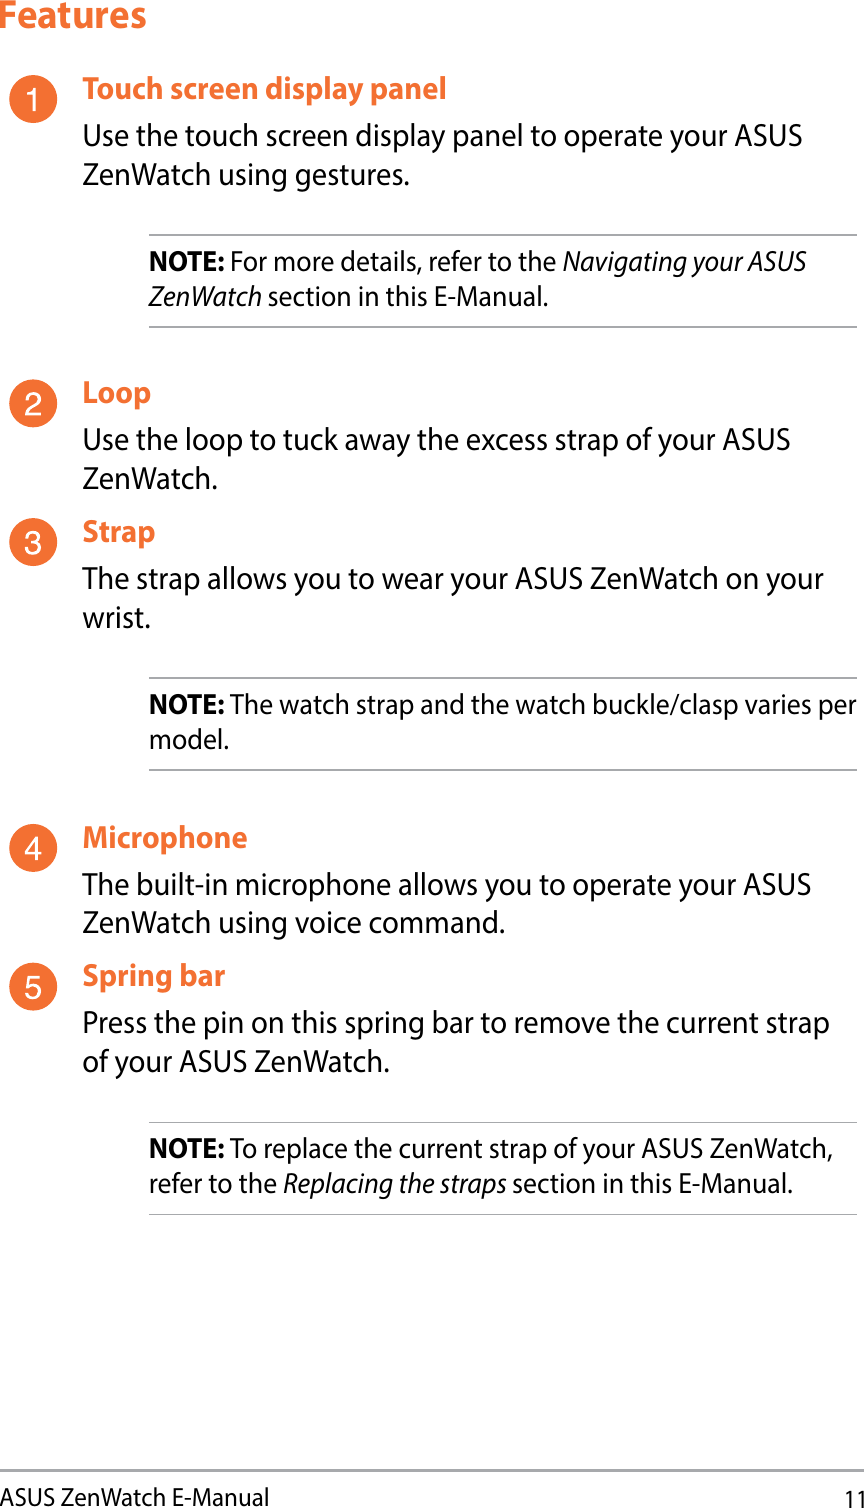 11ASUS ZenWatch E-ManualFeaturesTouch screen display panelUse the touch screen display panel to operate your ASUS ZenWatch using gestures.NOTE: For more details, refer to the Navigating your ASUS ZenWatch section in this E-Manual. LoopUse the loop to tuck away the excess strap of your ASUS ZenWatch.StrapThe strap allows you to wear your ASUS ZenWatch on your wrist. NOTE: The watch strap and the watch buckle/clasp varies per model.MicrophoneThe built-in microphone allows you to operate your ASUS ZenWatch using voice command. Spring barPress the pin on this spring bar to remove the current strap of your ASUS ZenWatch.NOTE: To replace the current strap of your ASUS ZenWatch, refer to the Replacing the straps section in this E-Manual. 